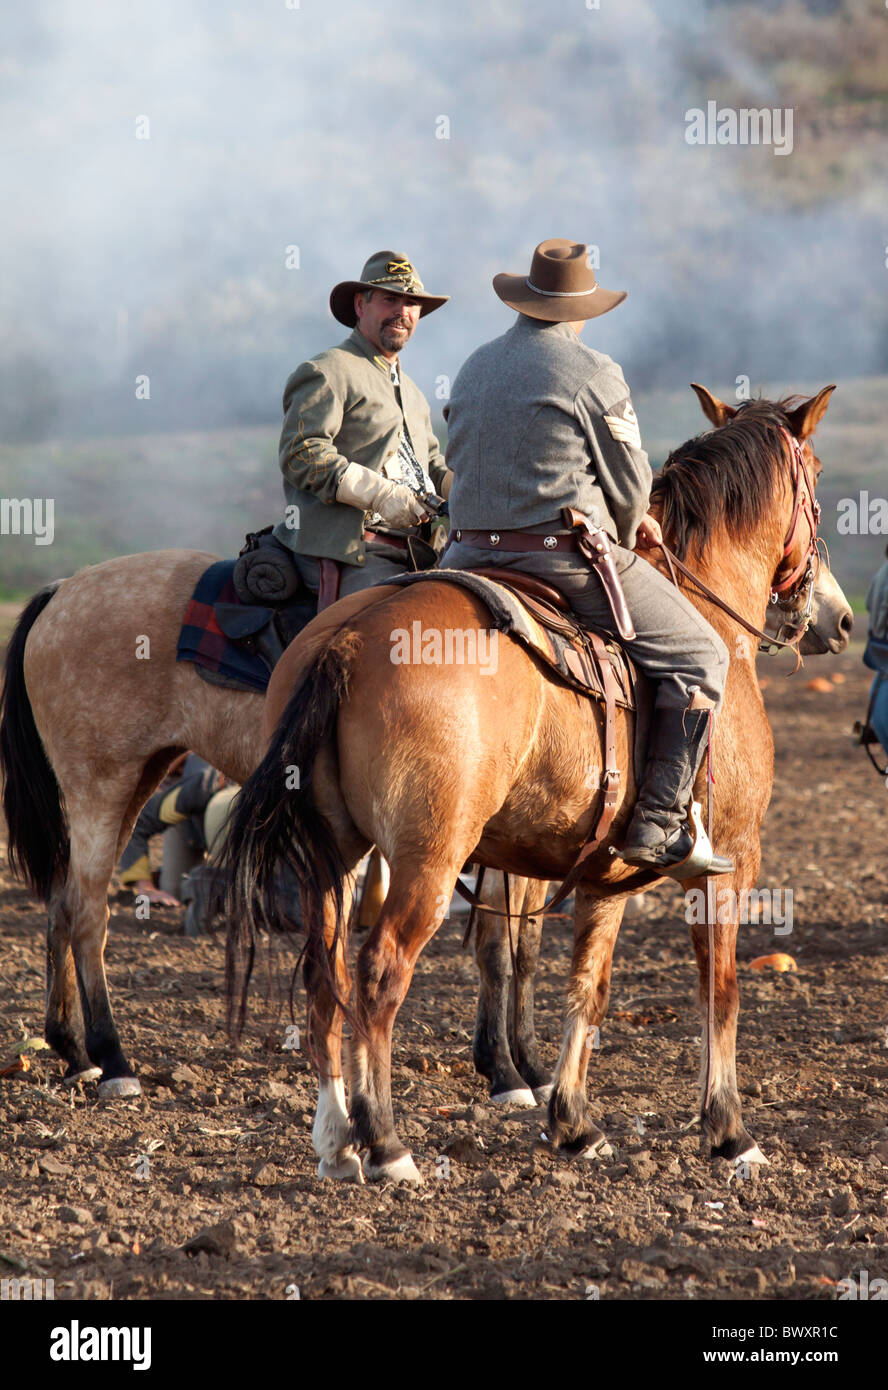 Two Confederate soldiers discussing battle strategy during Civil War Re-enactment battle of Gettysburg Stock Photo